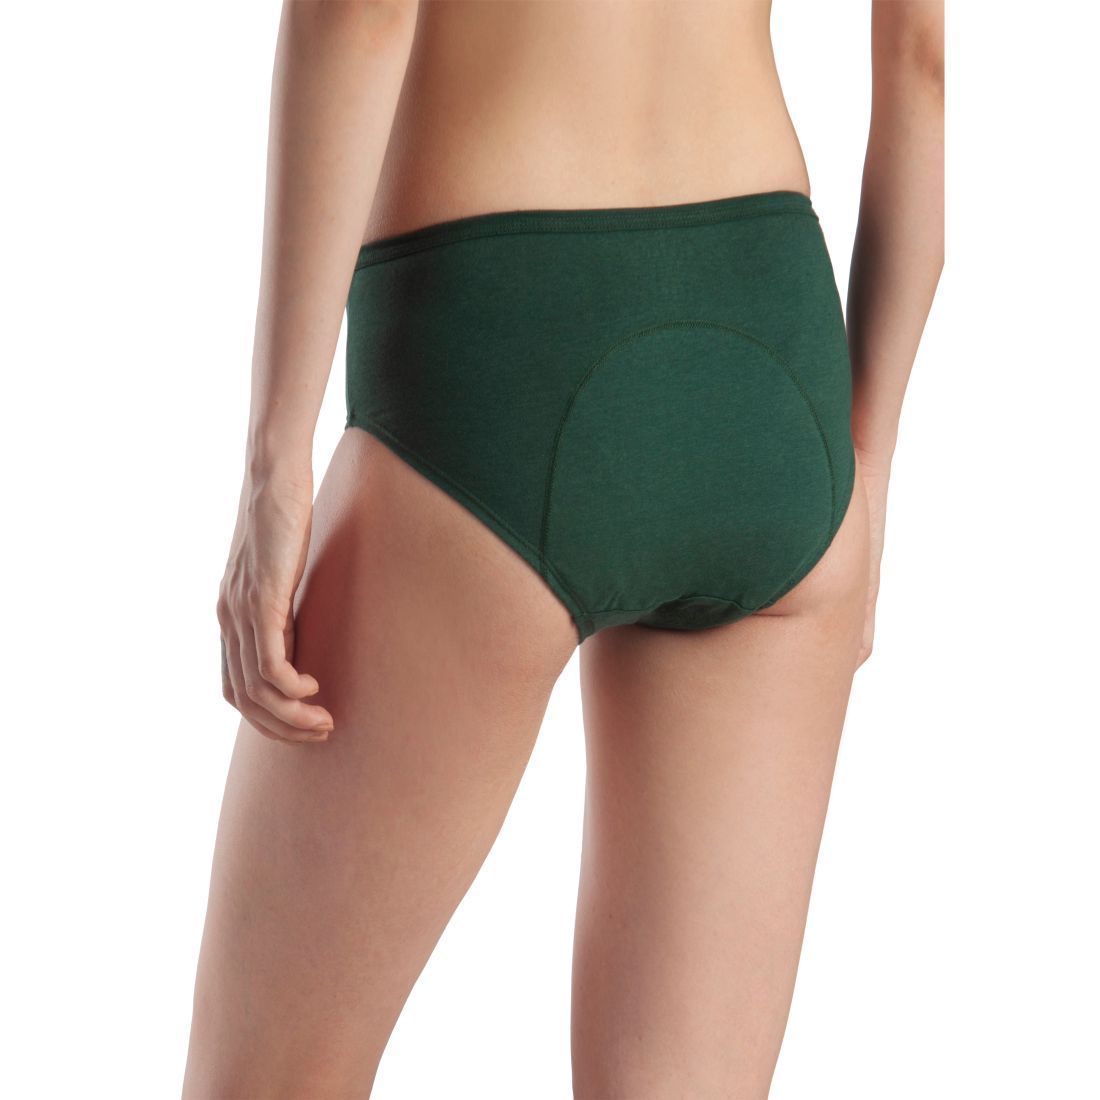 Lavos Performance - No Stain Period Panty -Bottle Green - XL